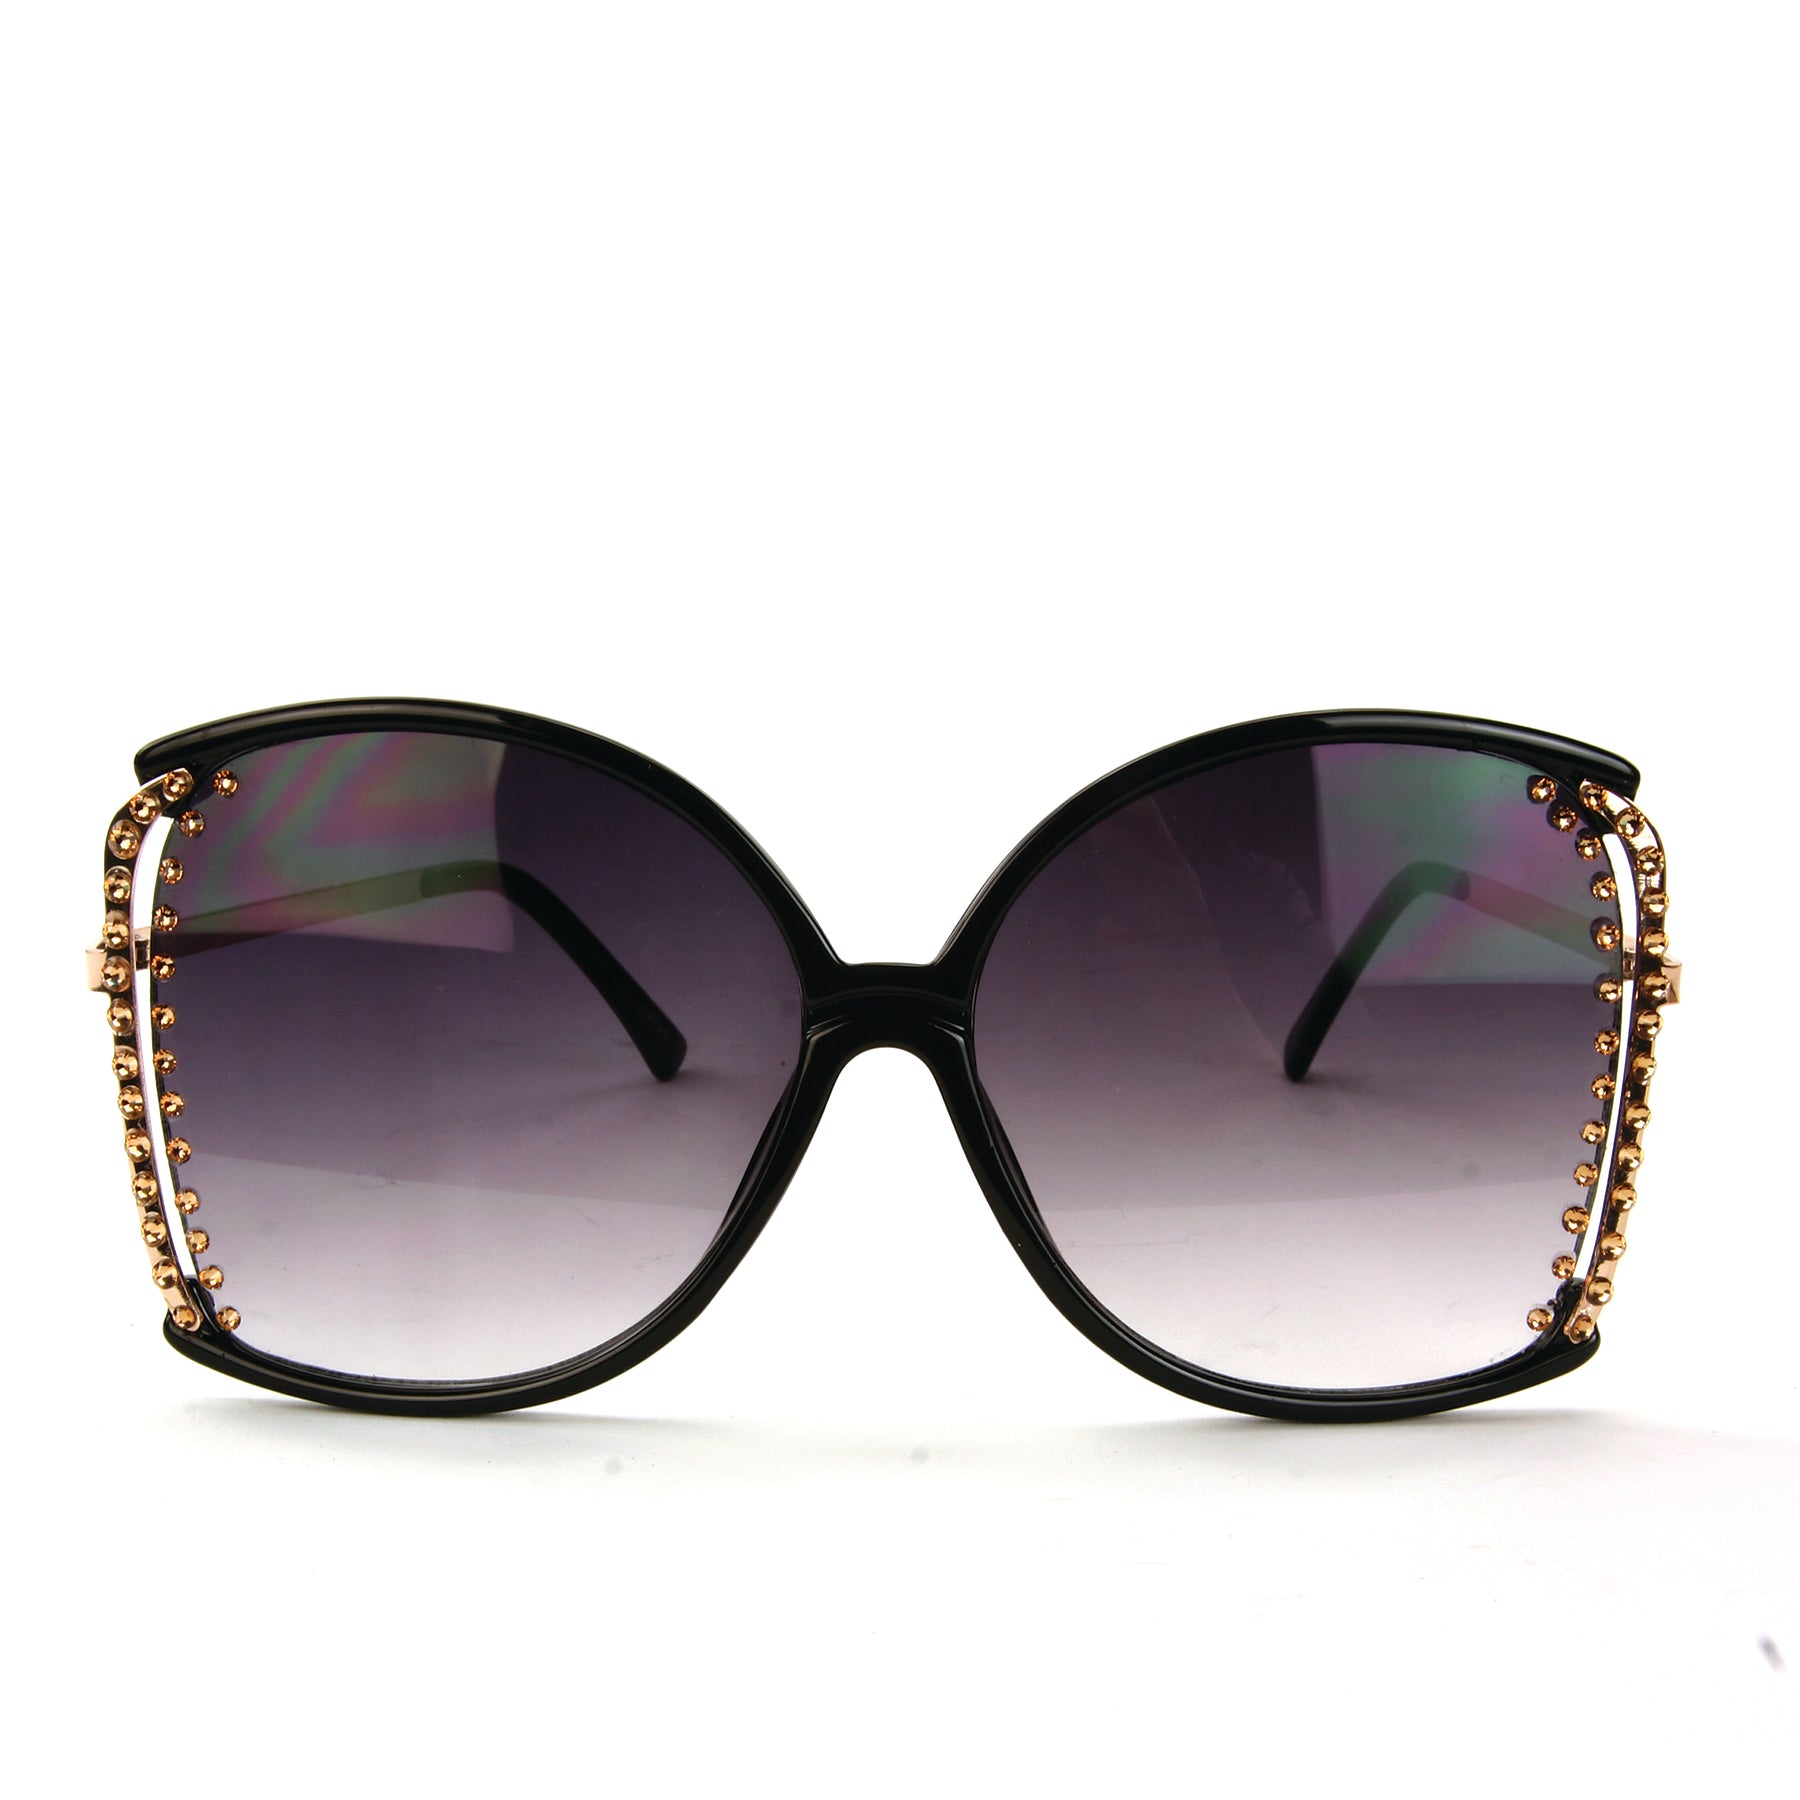 Sunglasses Made with Swarovski Elements, black color, front view